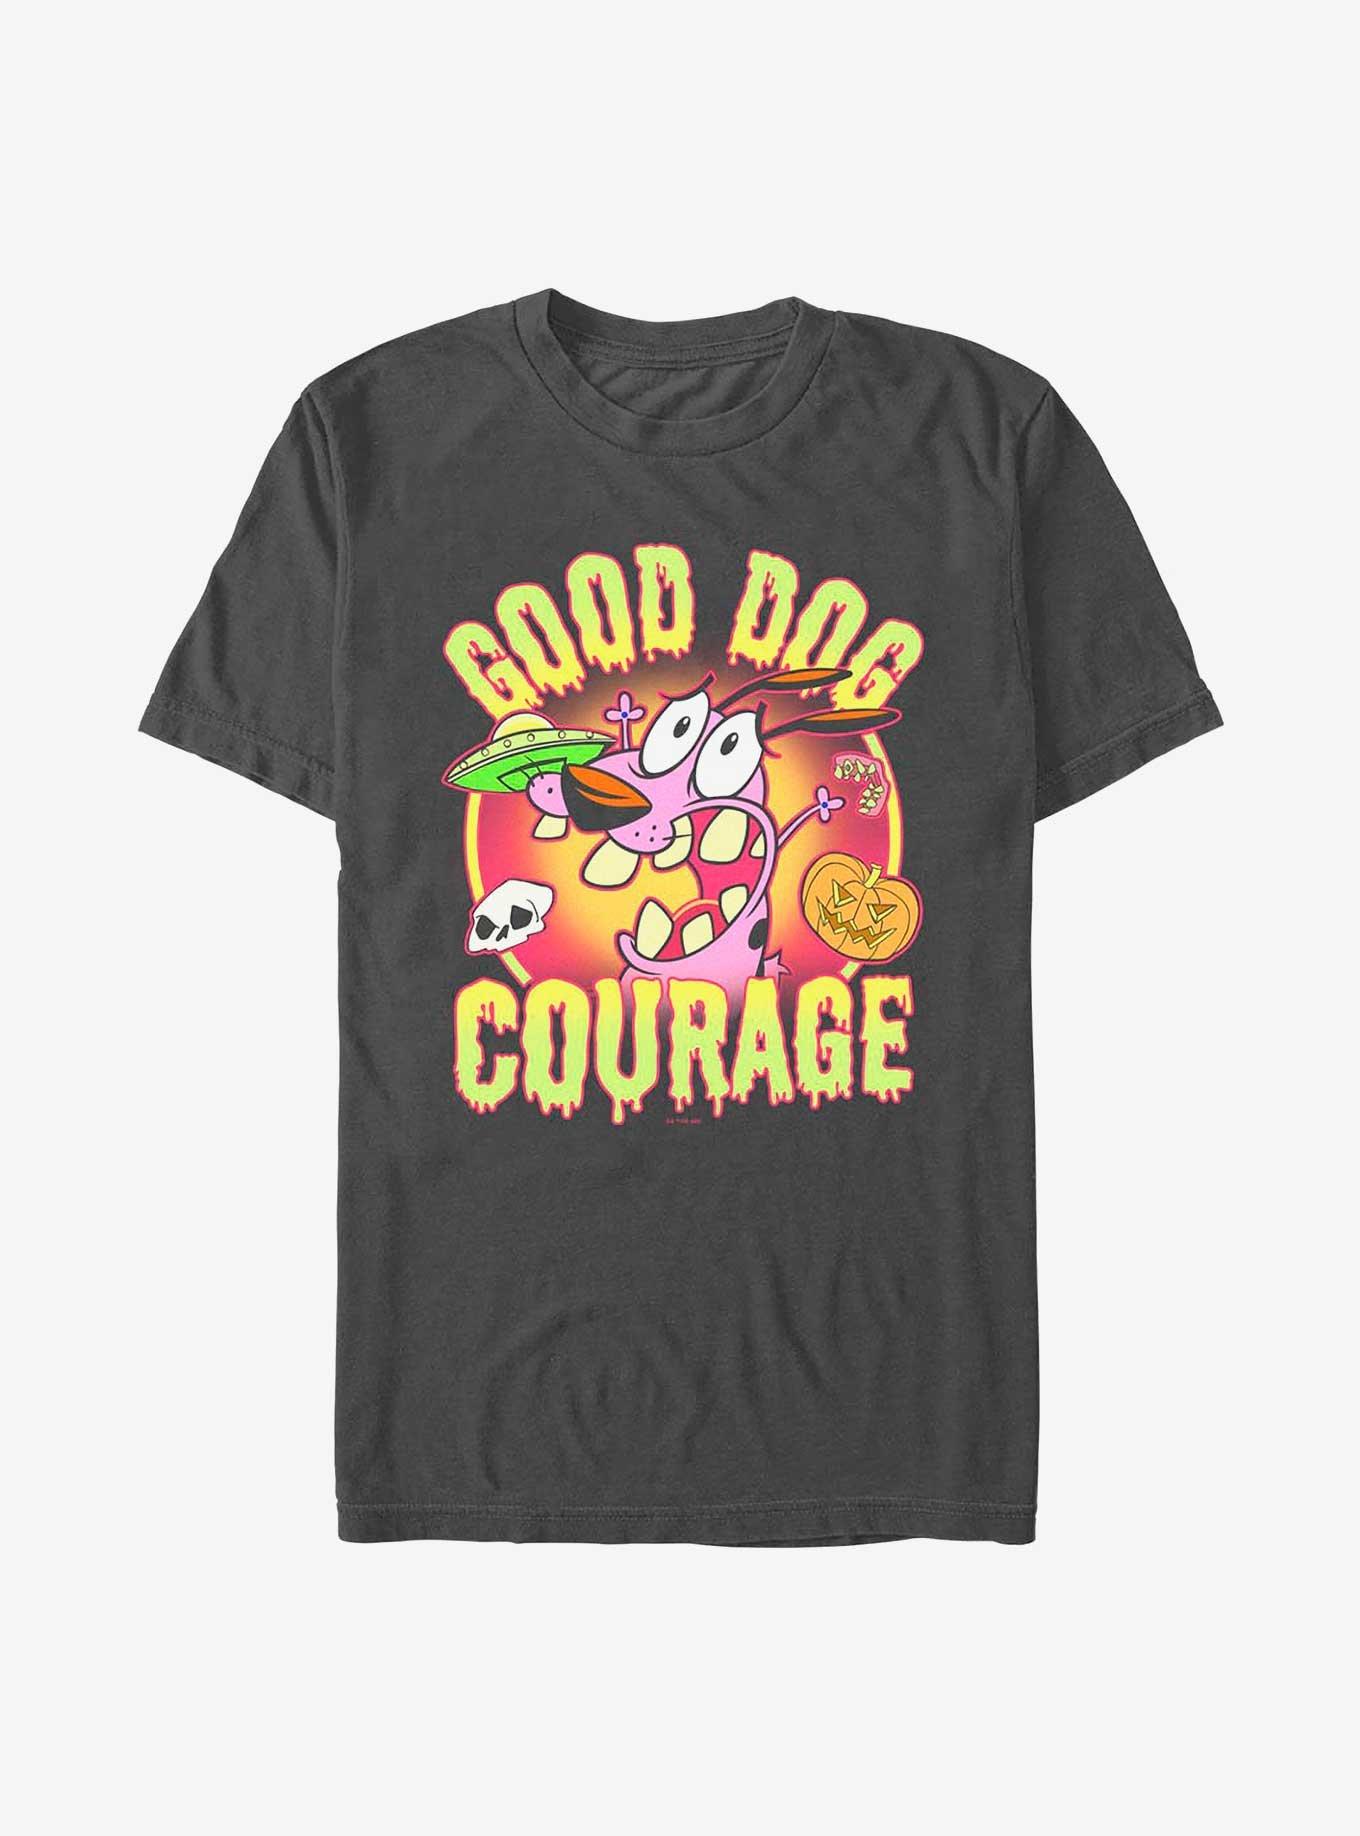 Cartoon Network Courage the Cowardly Dog Good Courage T-Shirt, CHARCOAL, hi-res